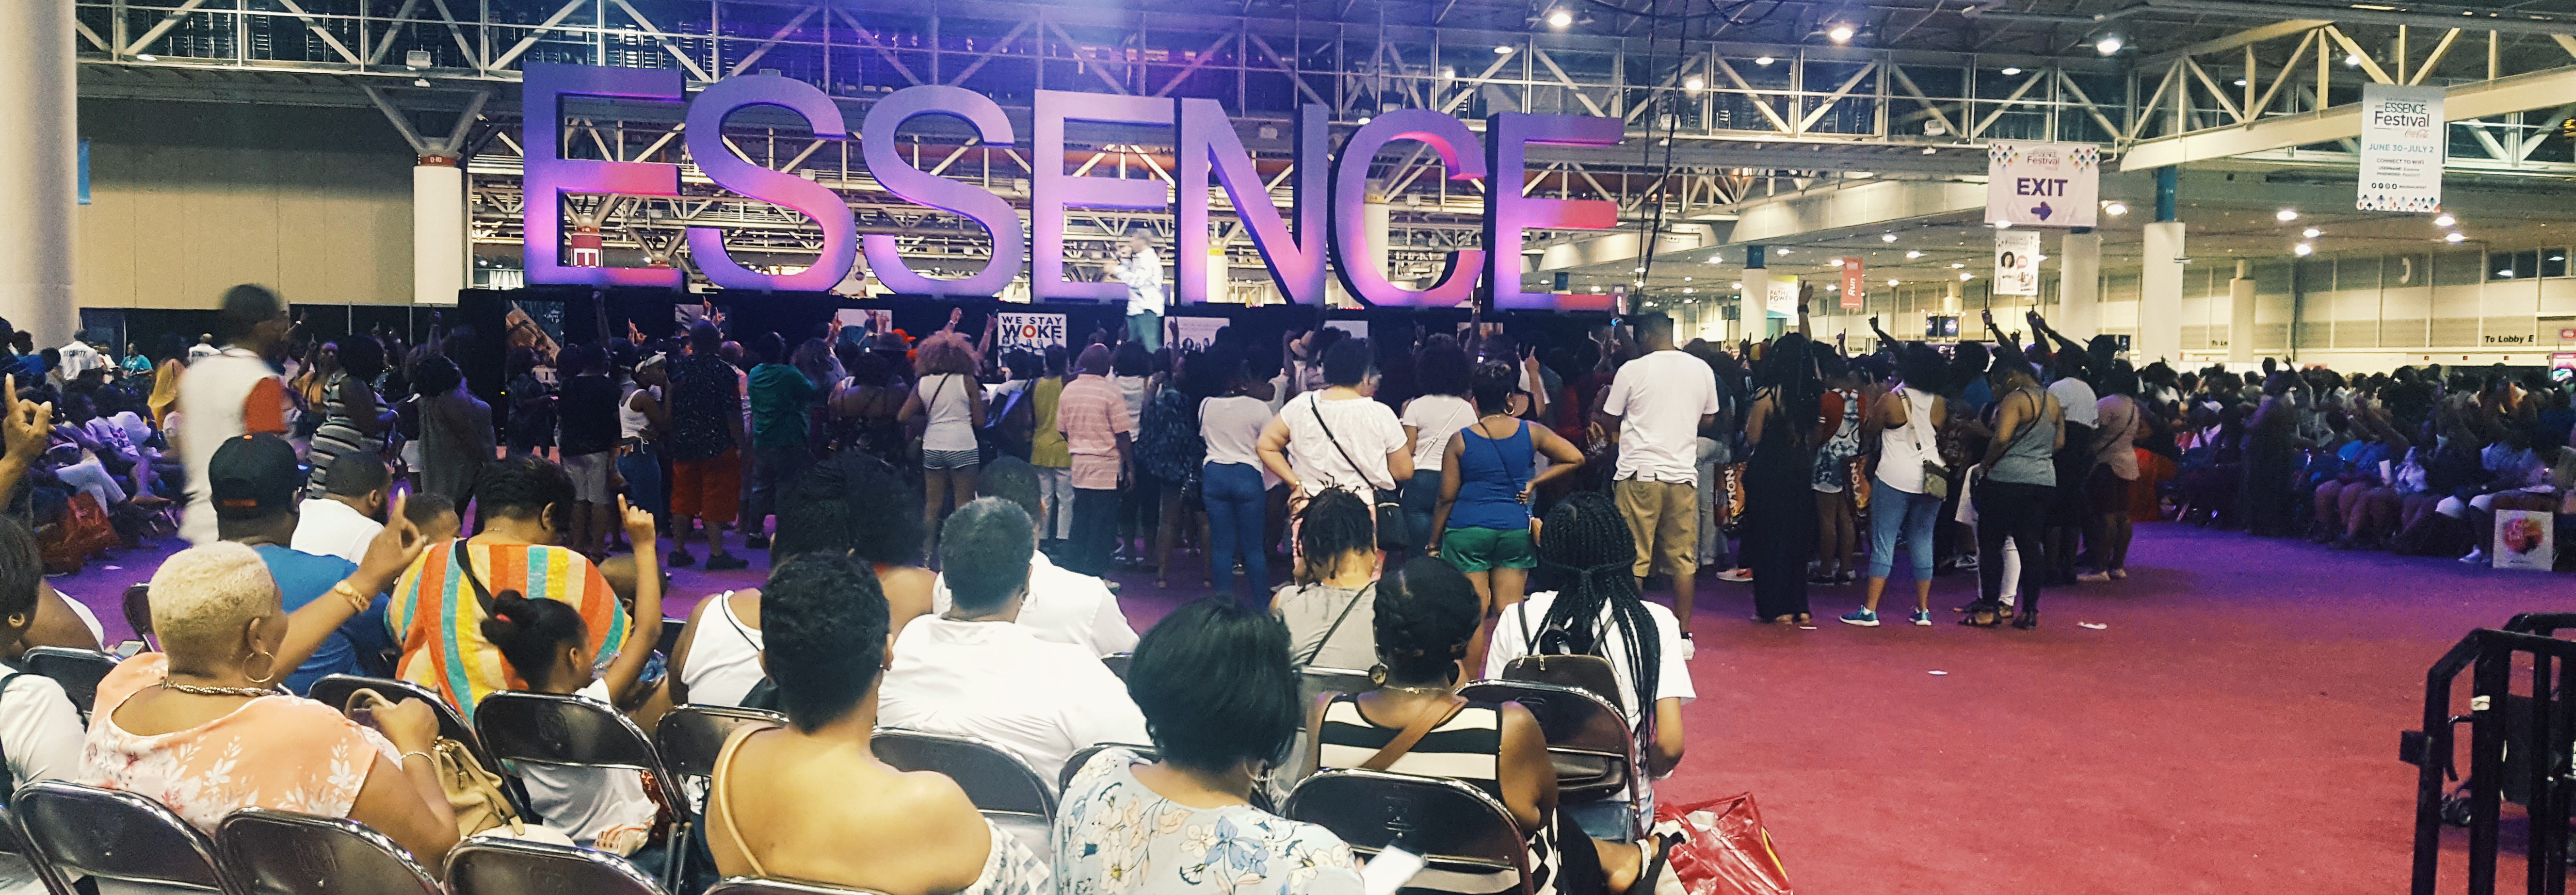 Essence Music Festival - Convention Center stage